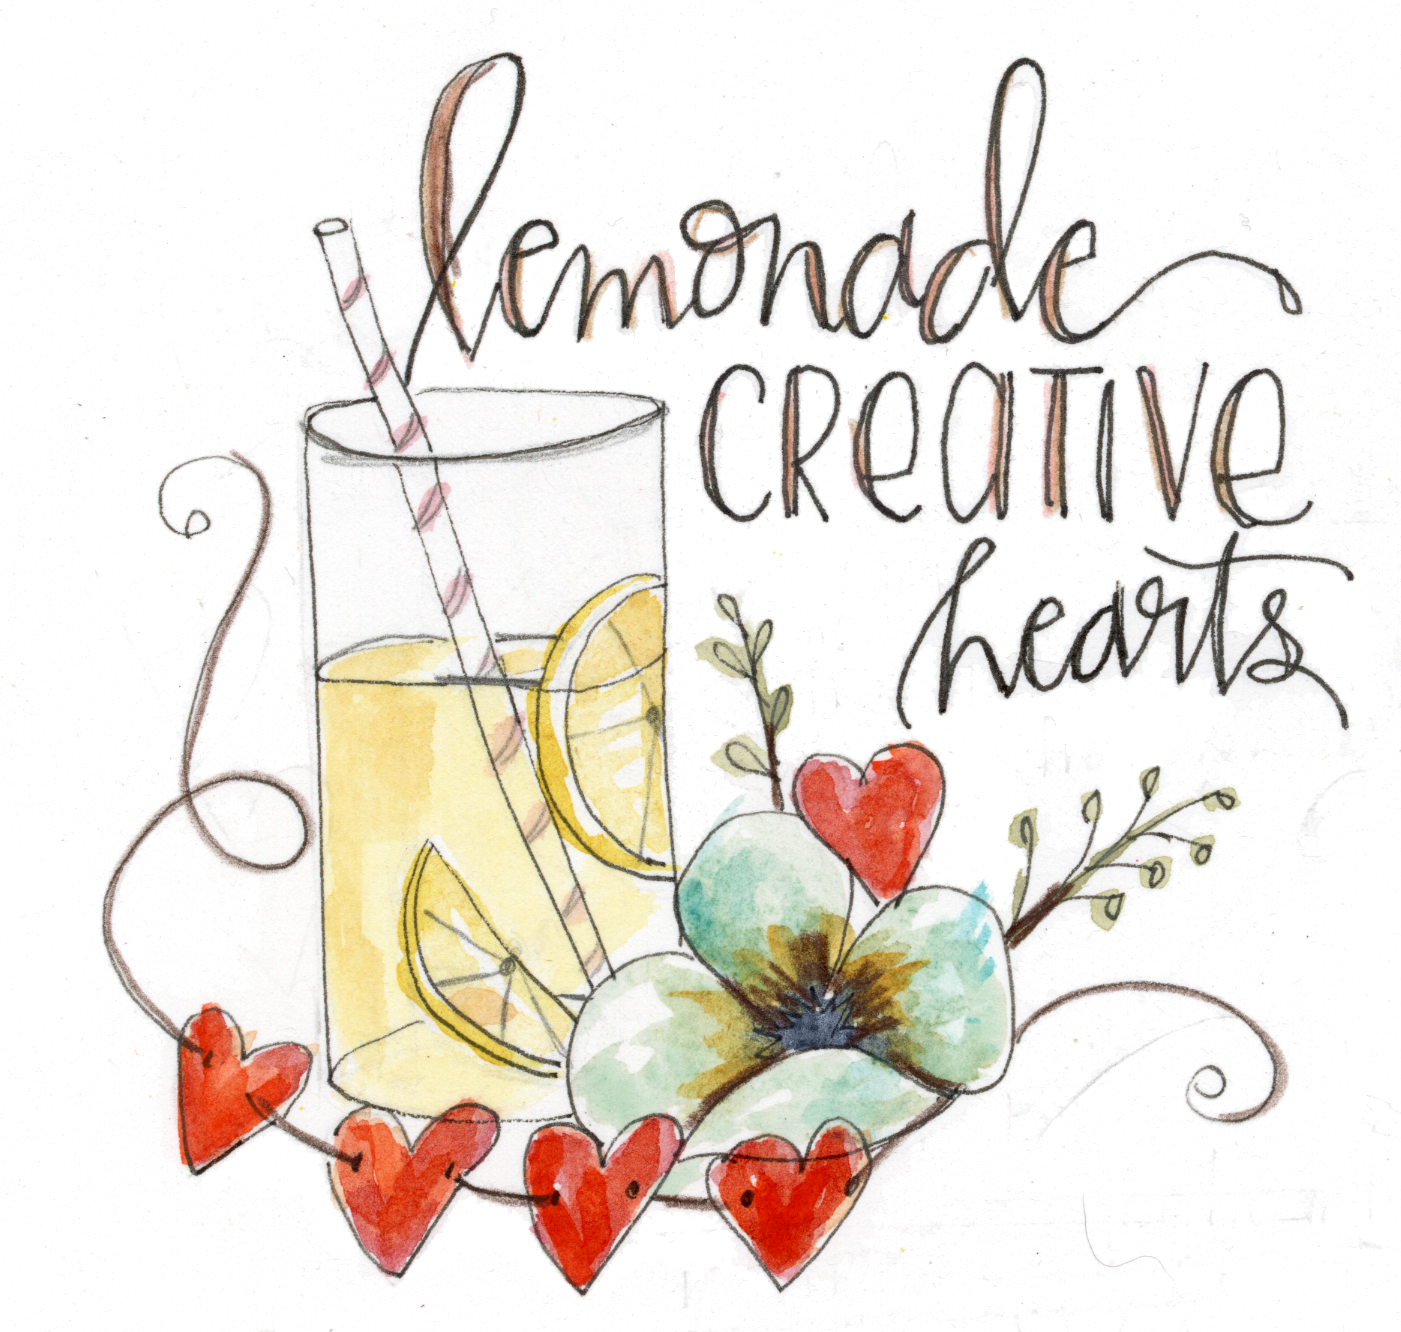 Behind the Scenes: What to Expect Inside Each Month's Class of "Lemonade Creatives" Monthly Membership for Bible Journaling